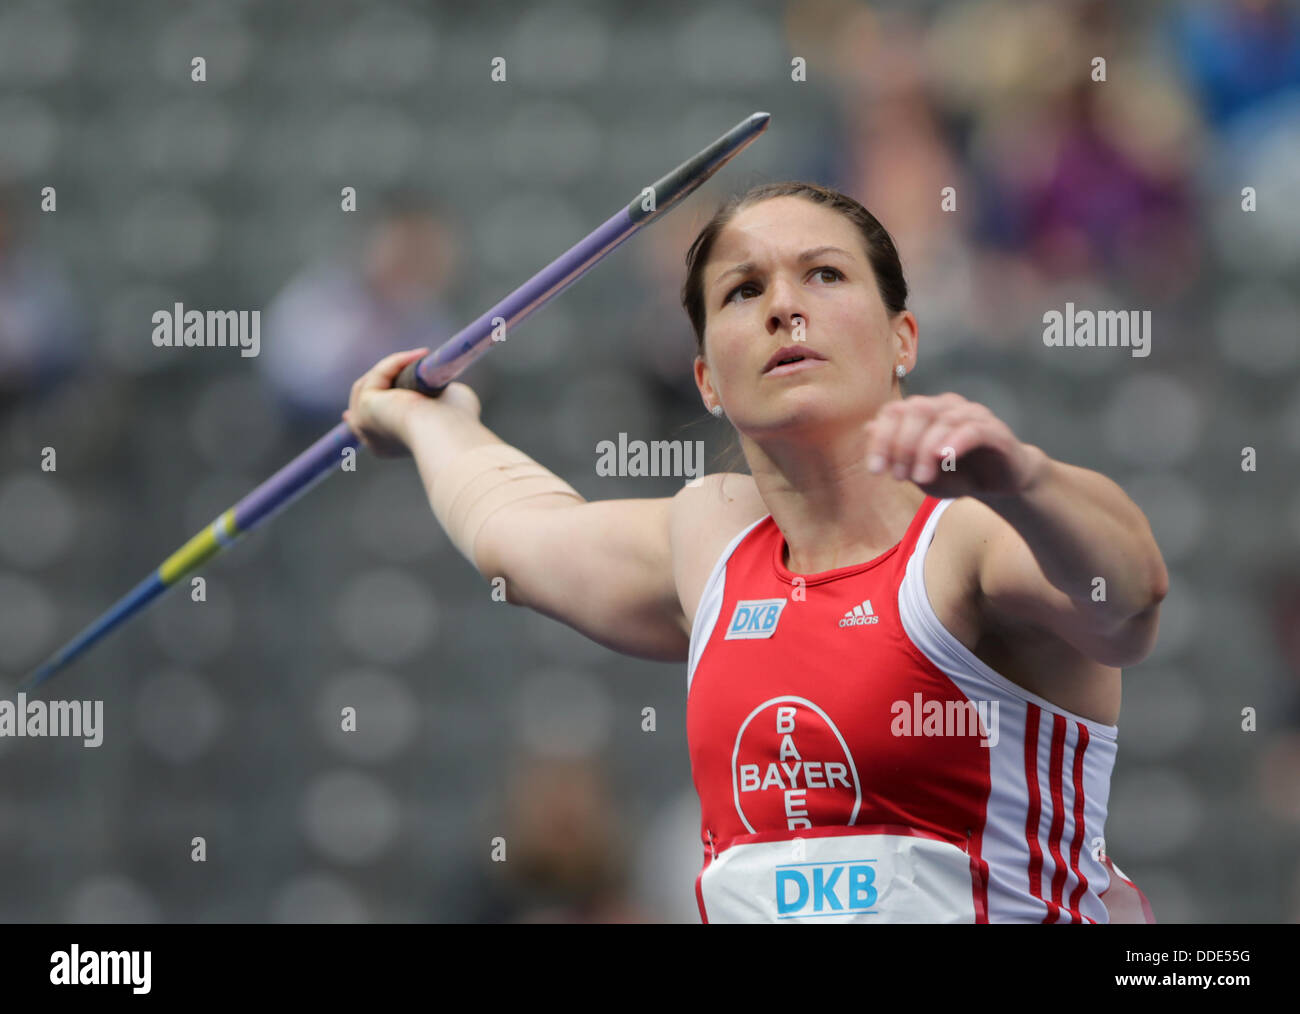 Germany's Linda Stahl in action during the javelin throw competition of the international athletics meet ISTAF at Olympiastadion in Berlin, Germany, 01 September 2013.  Photo: MICHAEL KAPPELER Stock Photo